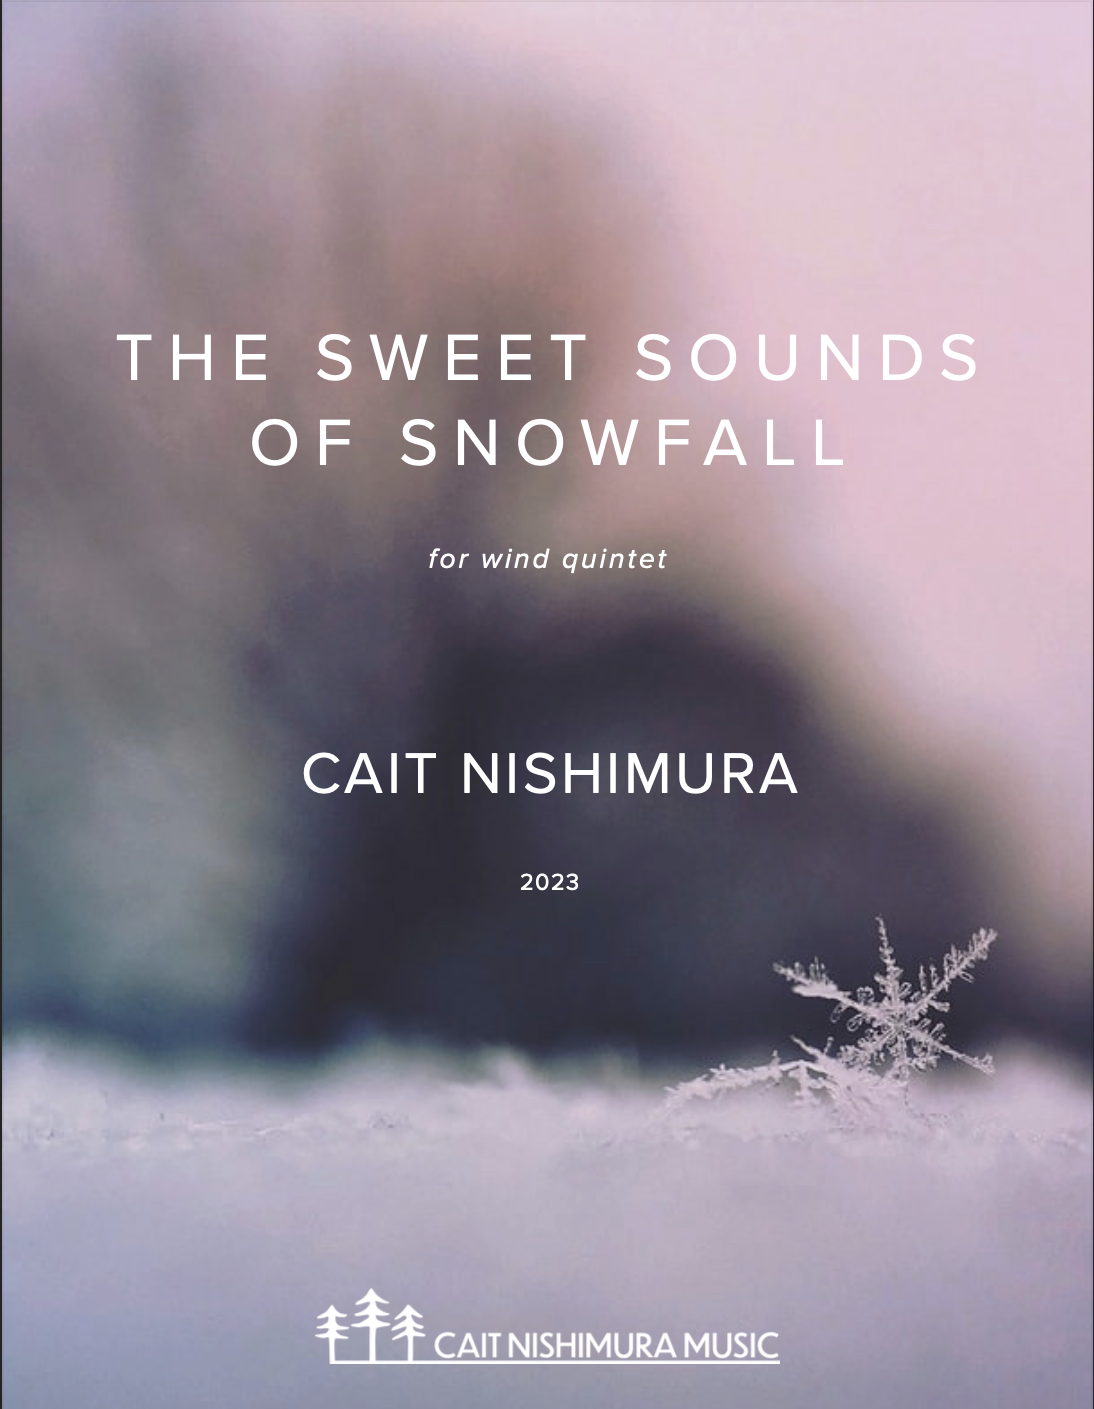 The Sweet Sounds Of Snowfall (Wind Quintet Version) by Cait Nishimura